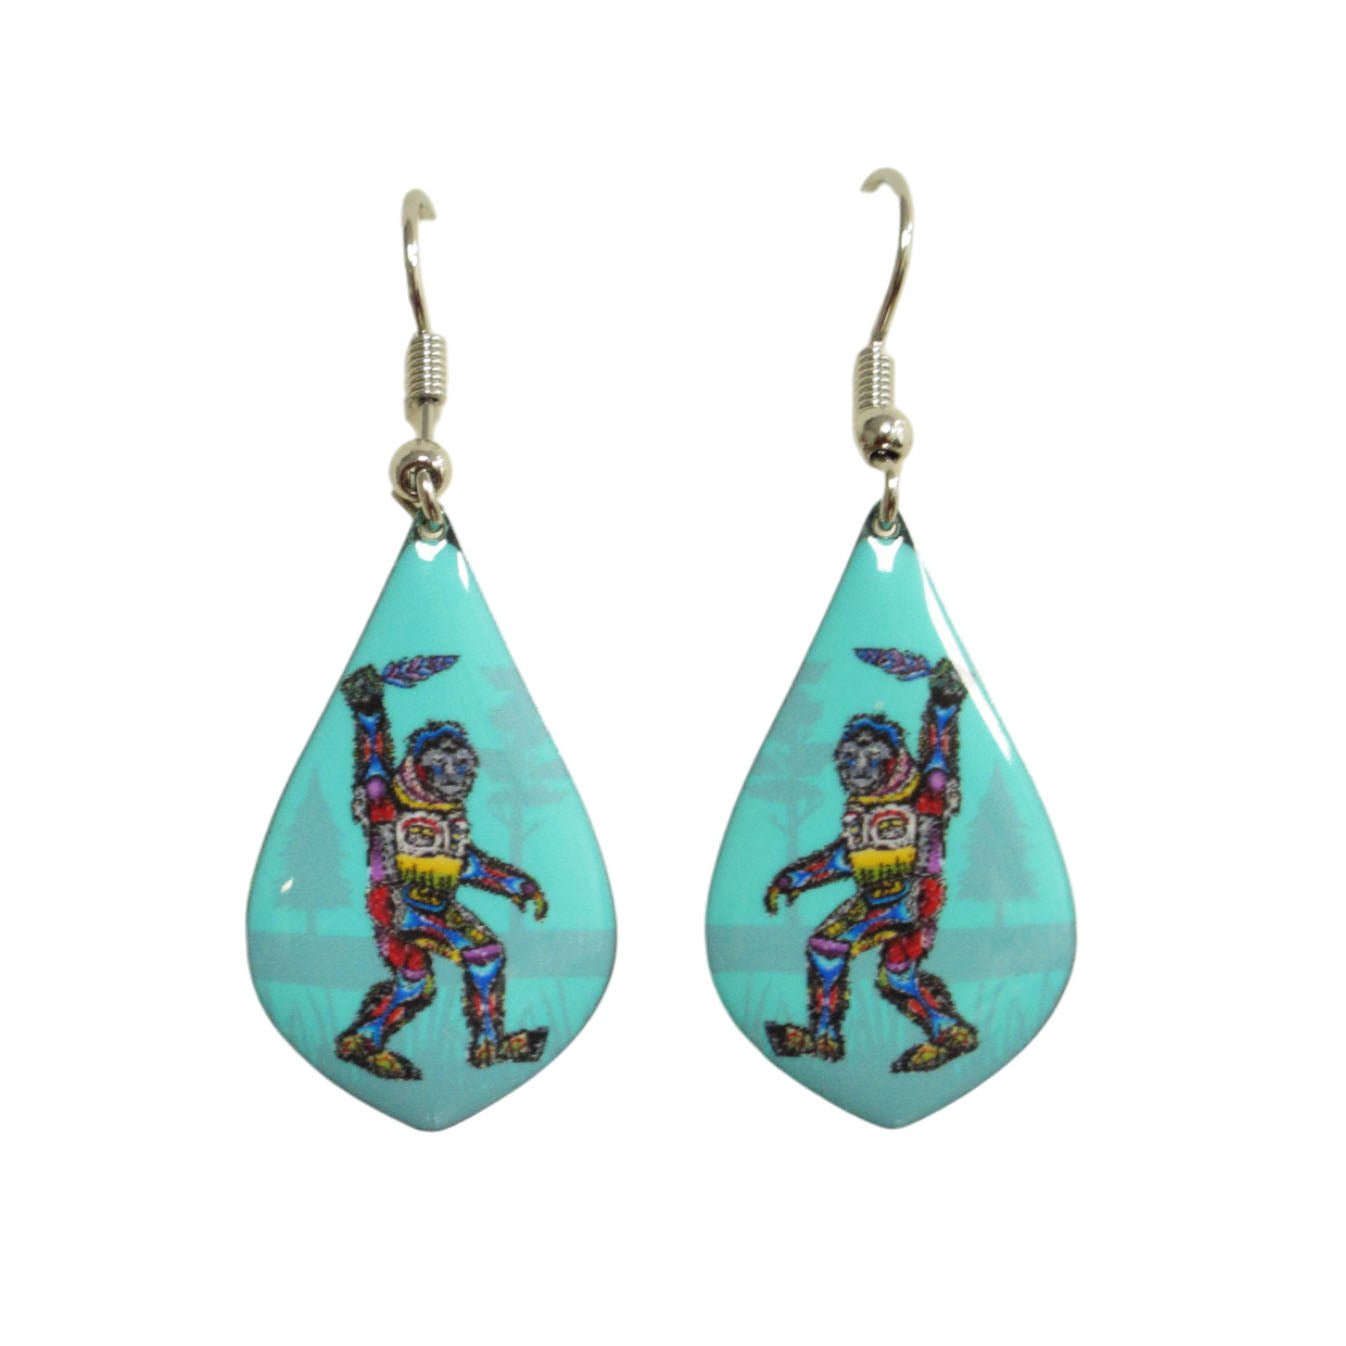 Jessica Somers Sasquatch Gallery Collection Earrings